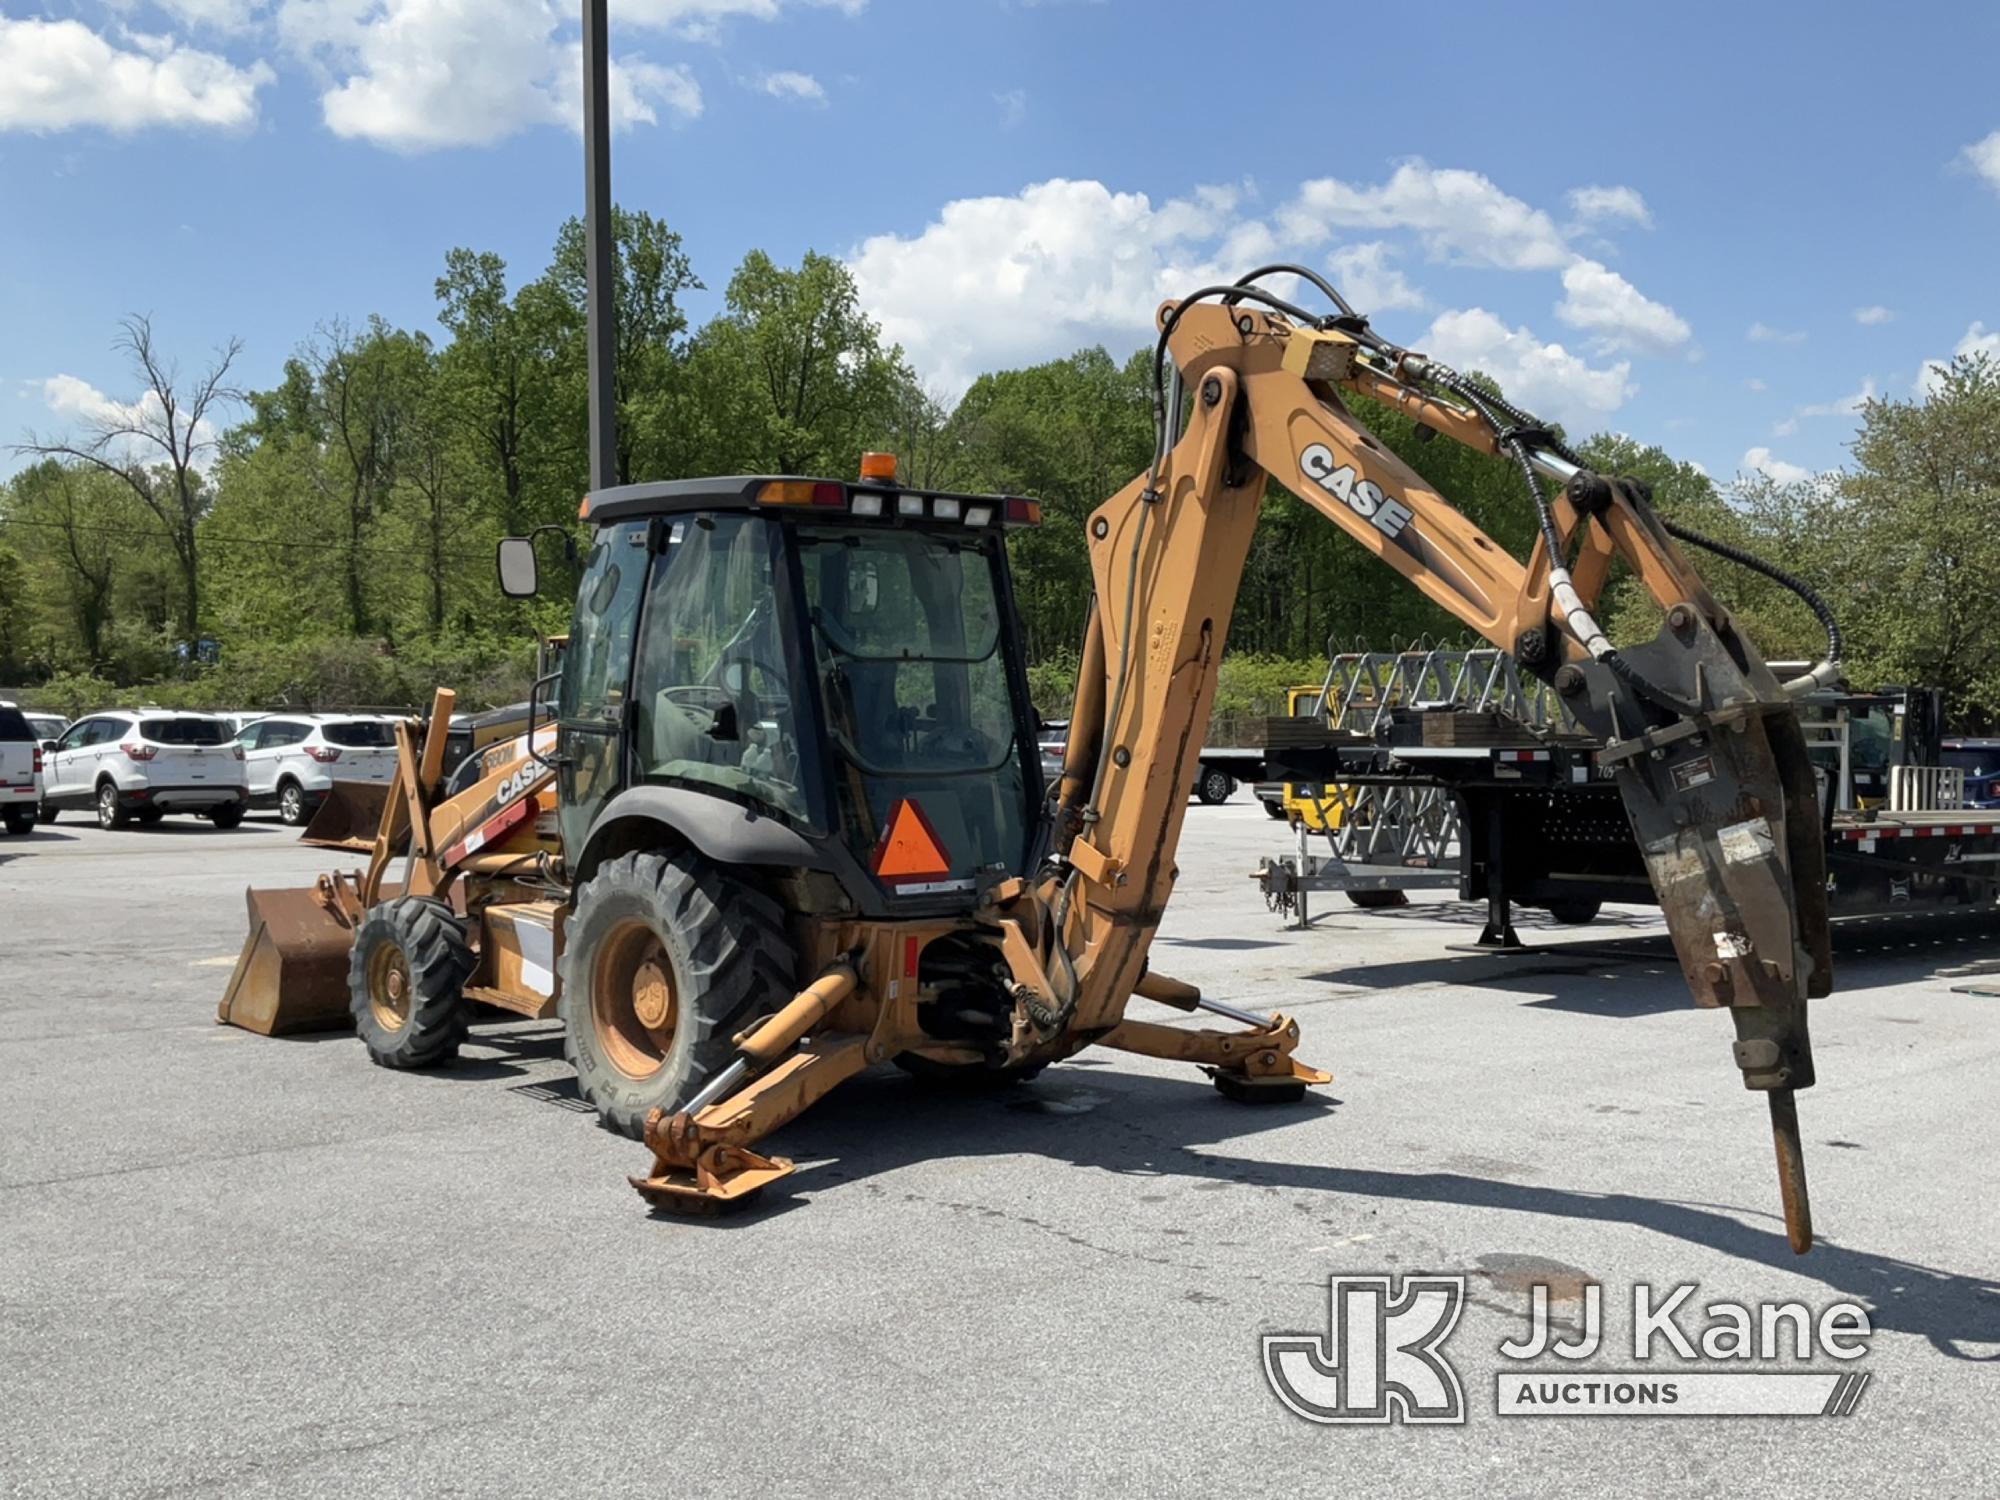 (Chester Springs, PA) 2006 Case 580M Tractor Loader Backhoe No Title) (Runs & Moves, Hyd Hammer Cond